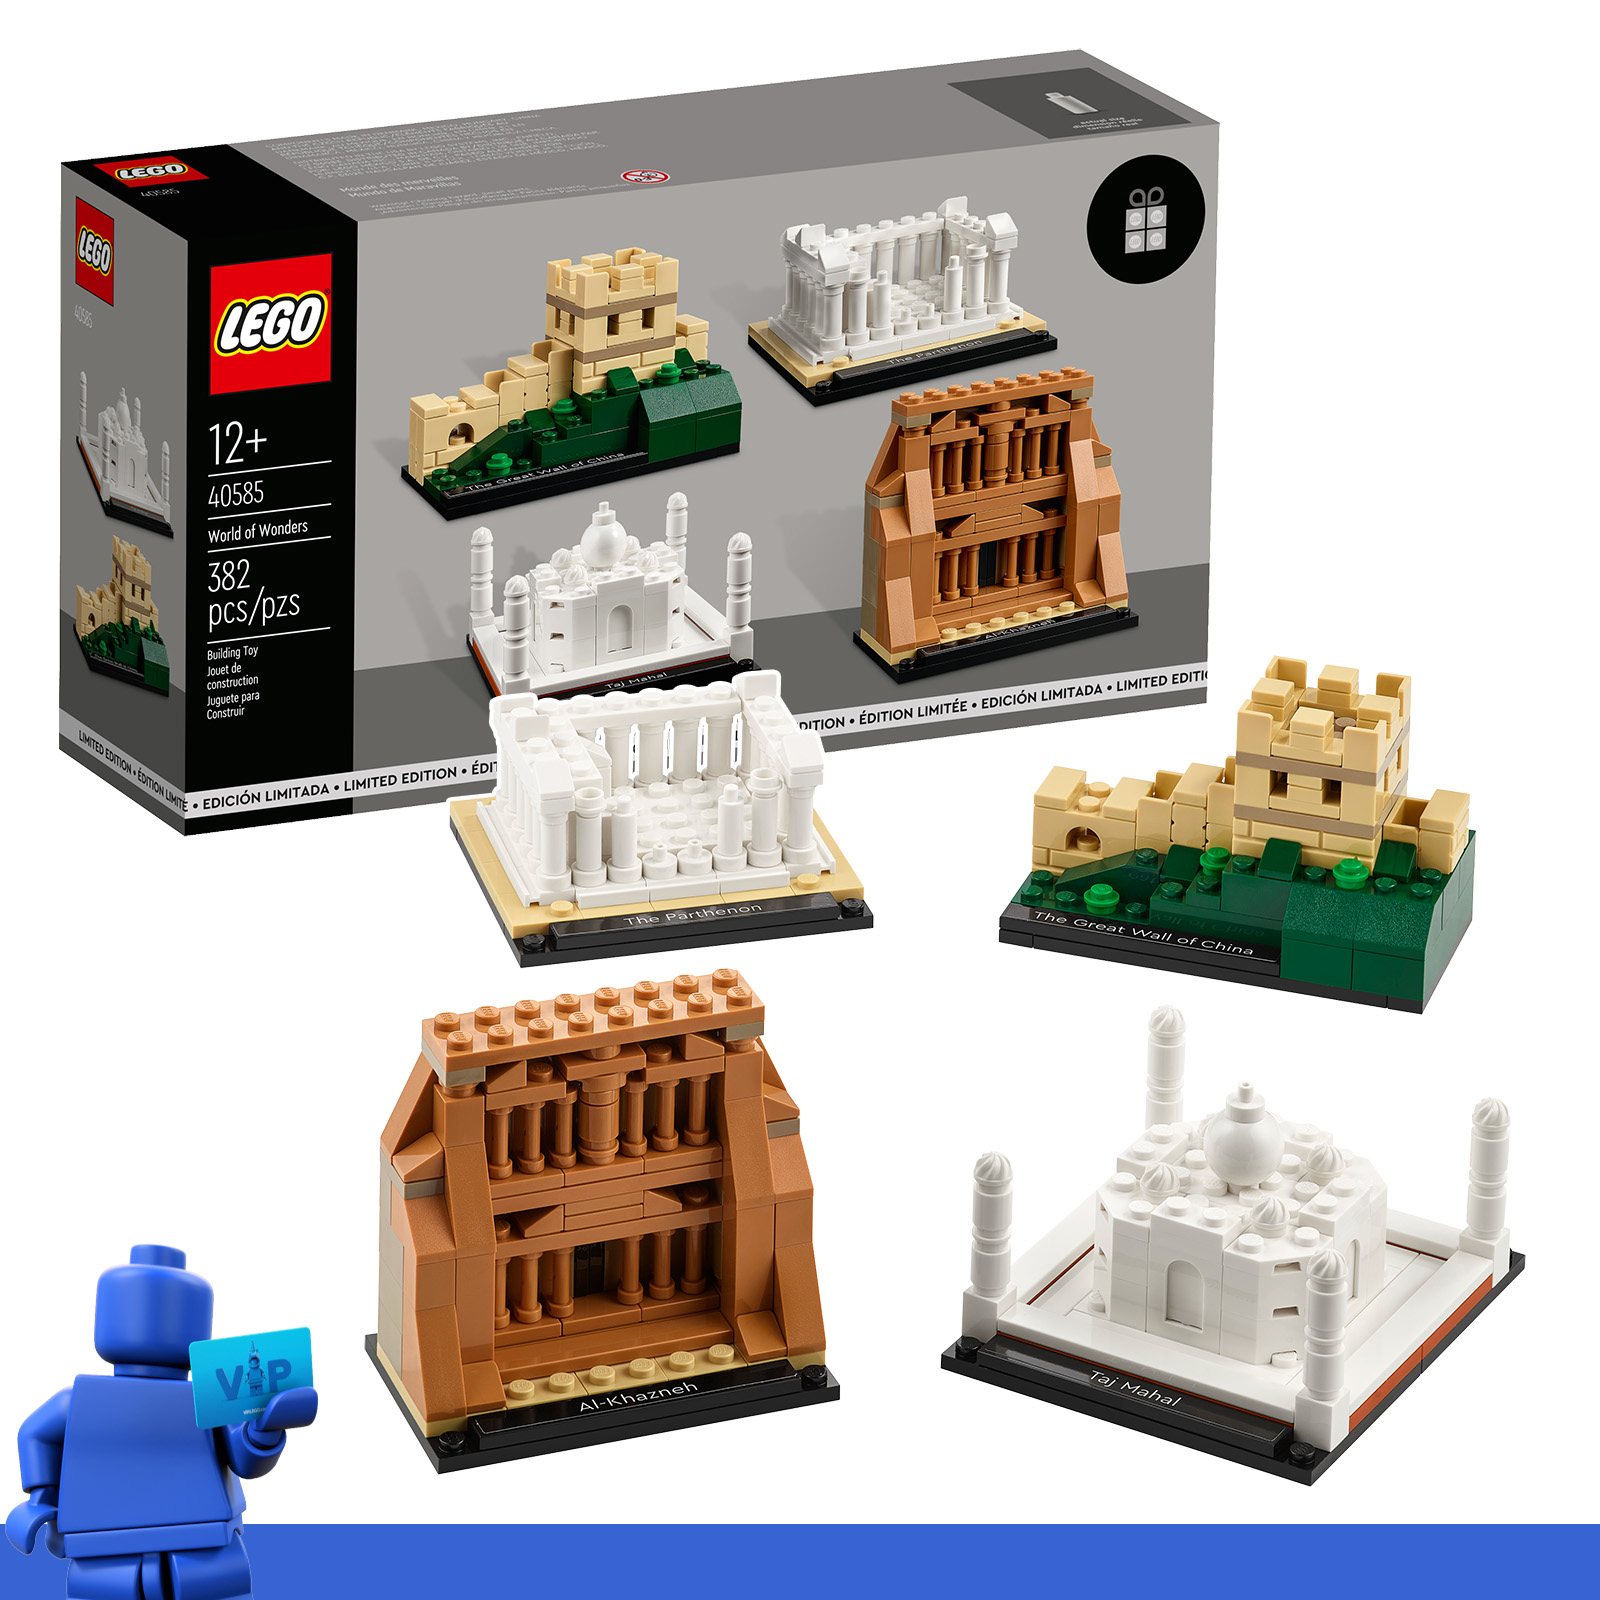 On the VIP rewards center: LEGO sets 40584 Birthday Diorama and 40585 World of Wonders available in exchange for VIP points